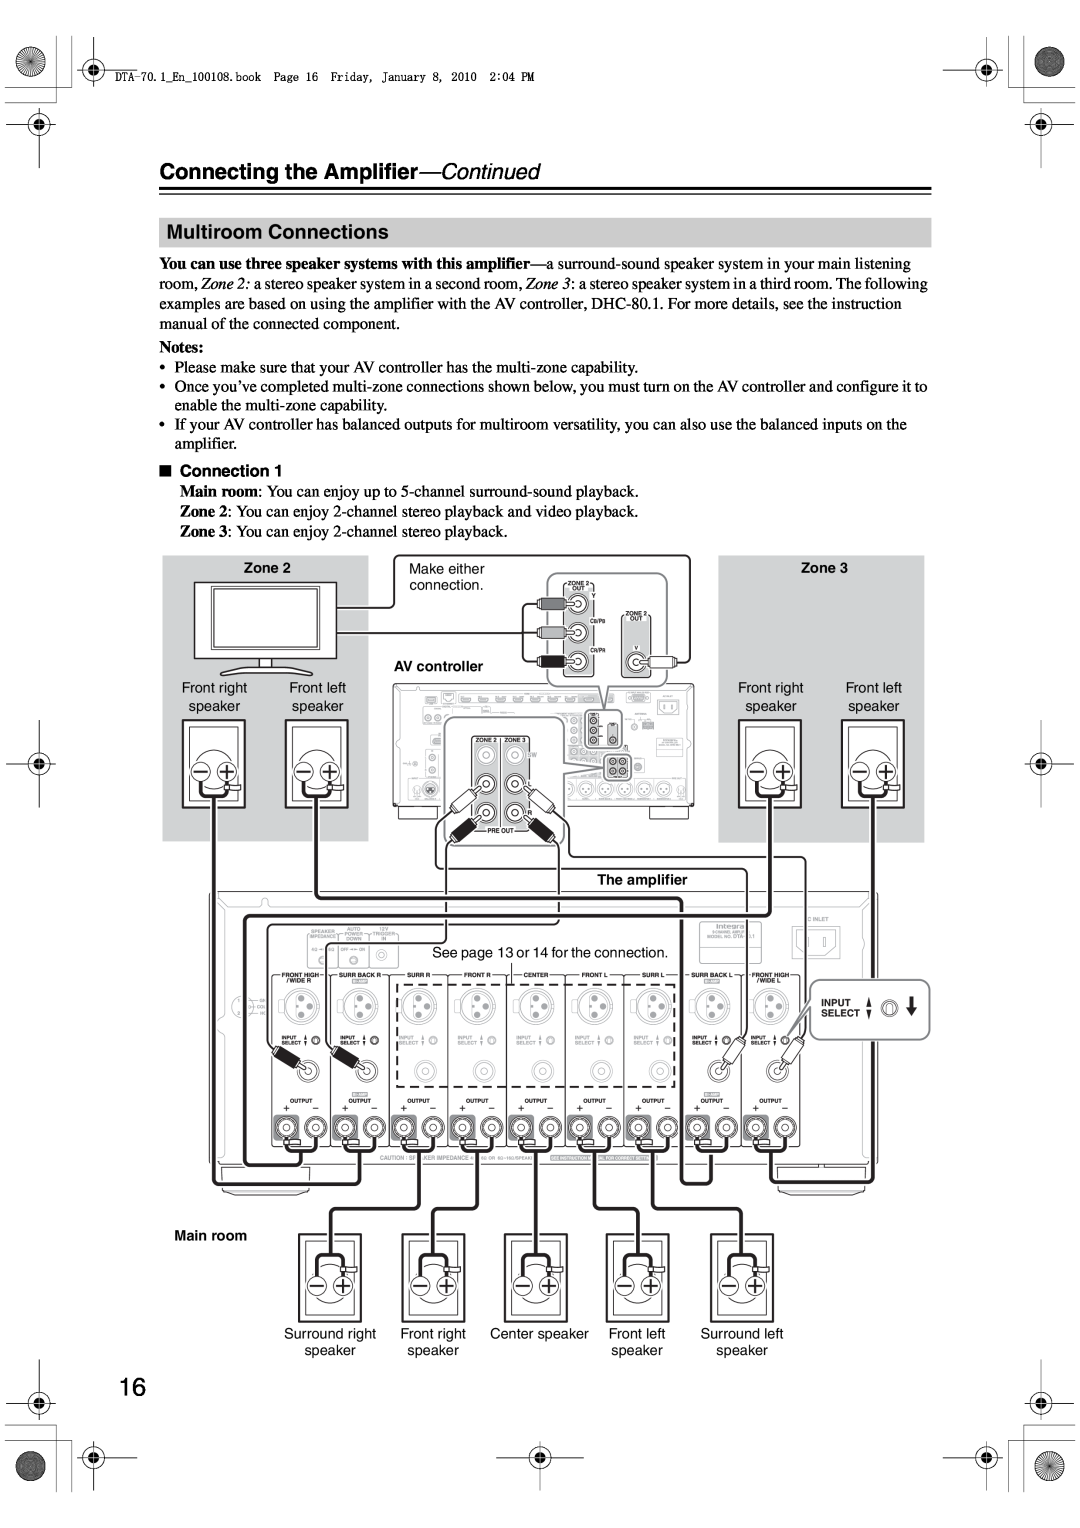 Integra DTA-70.1 instruction manual Multiroom Connections, Connecting the Amplifier-Continued 